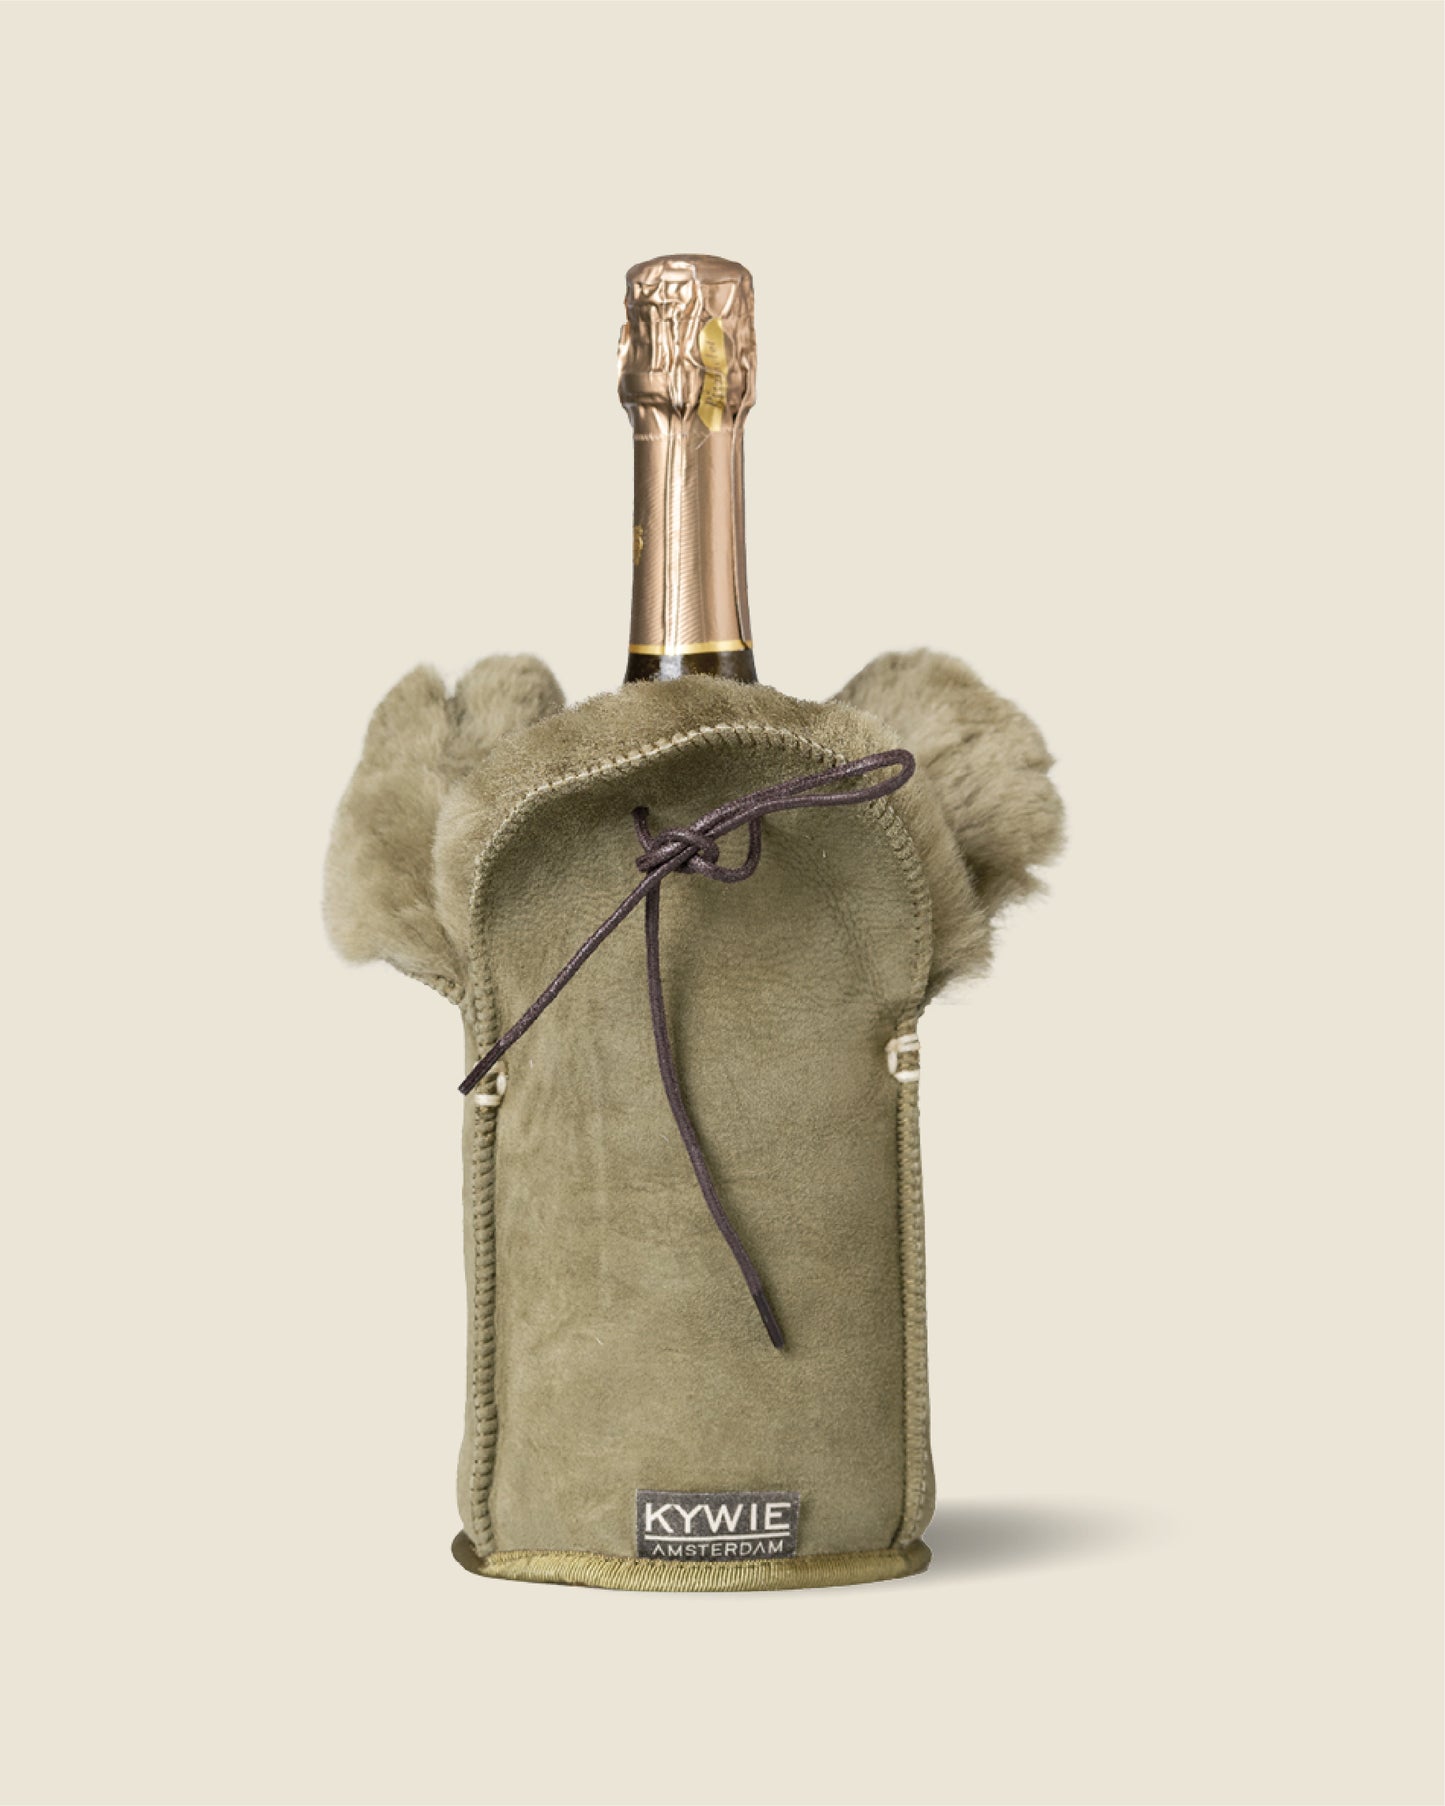 Kywie - The Wool Wine Cooler - Sparkling Wine